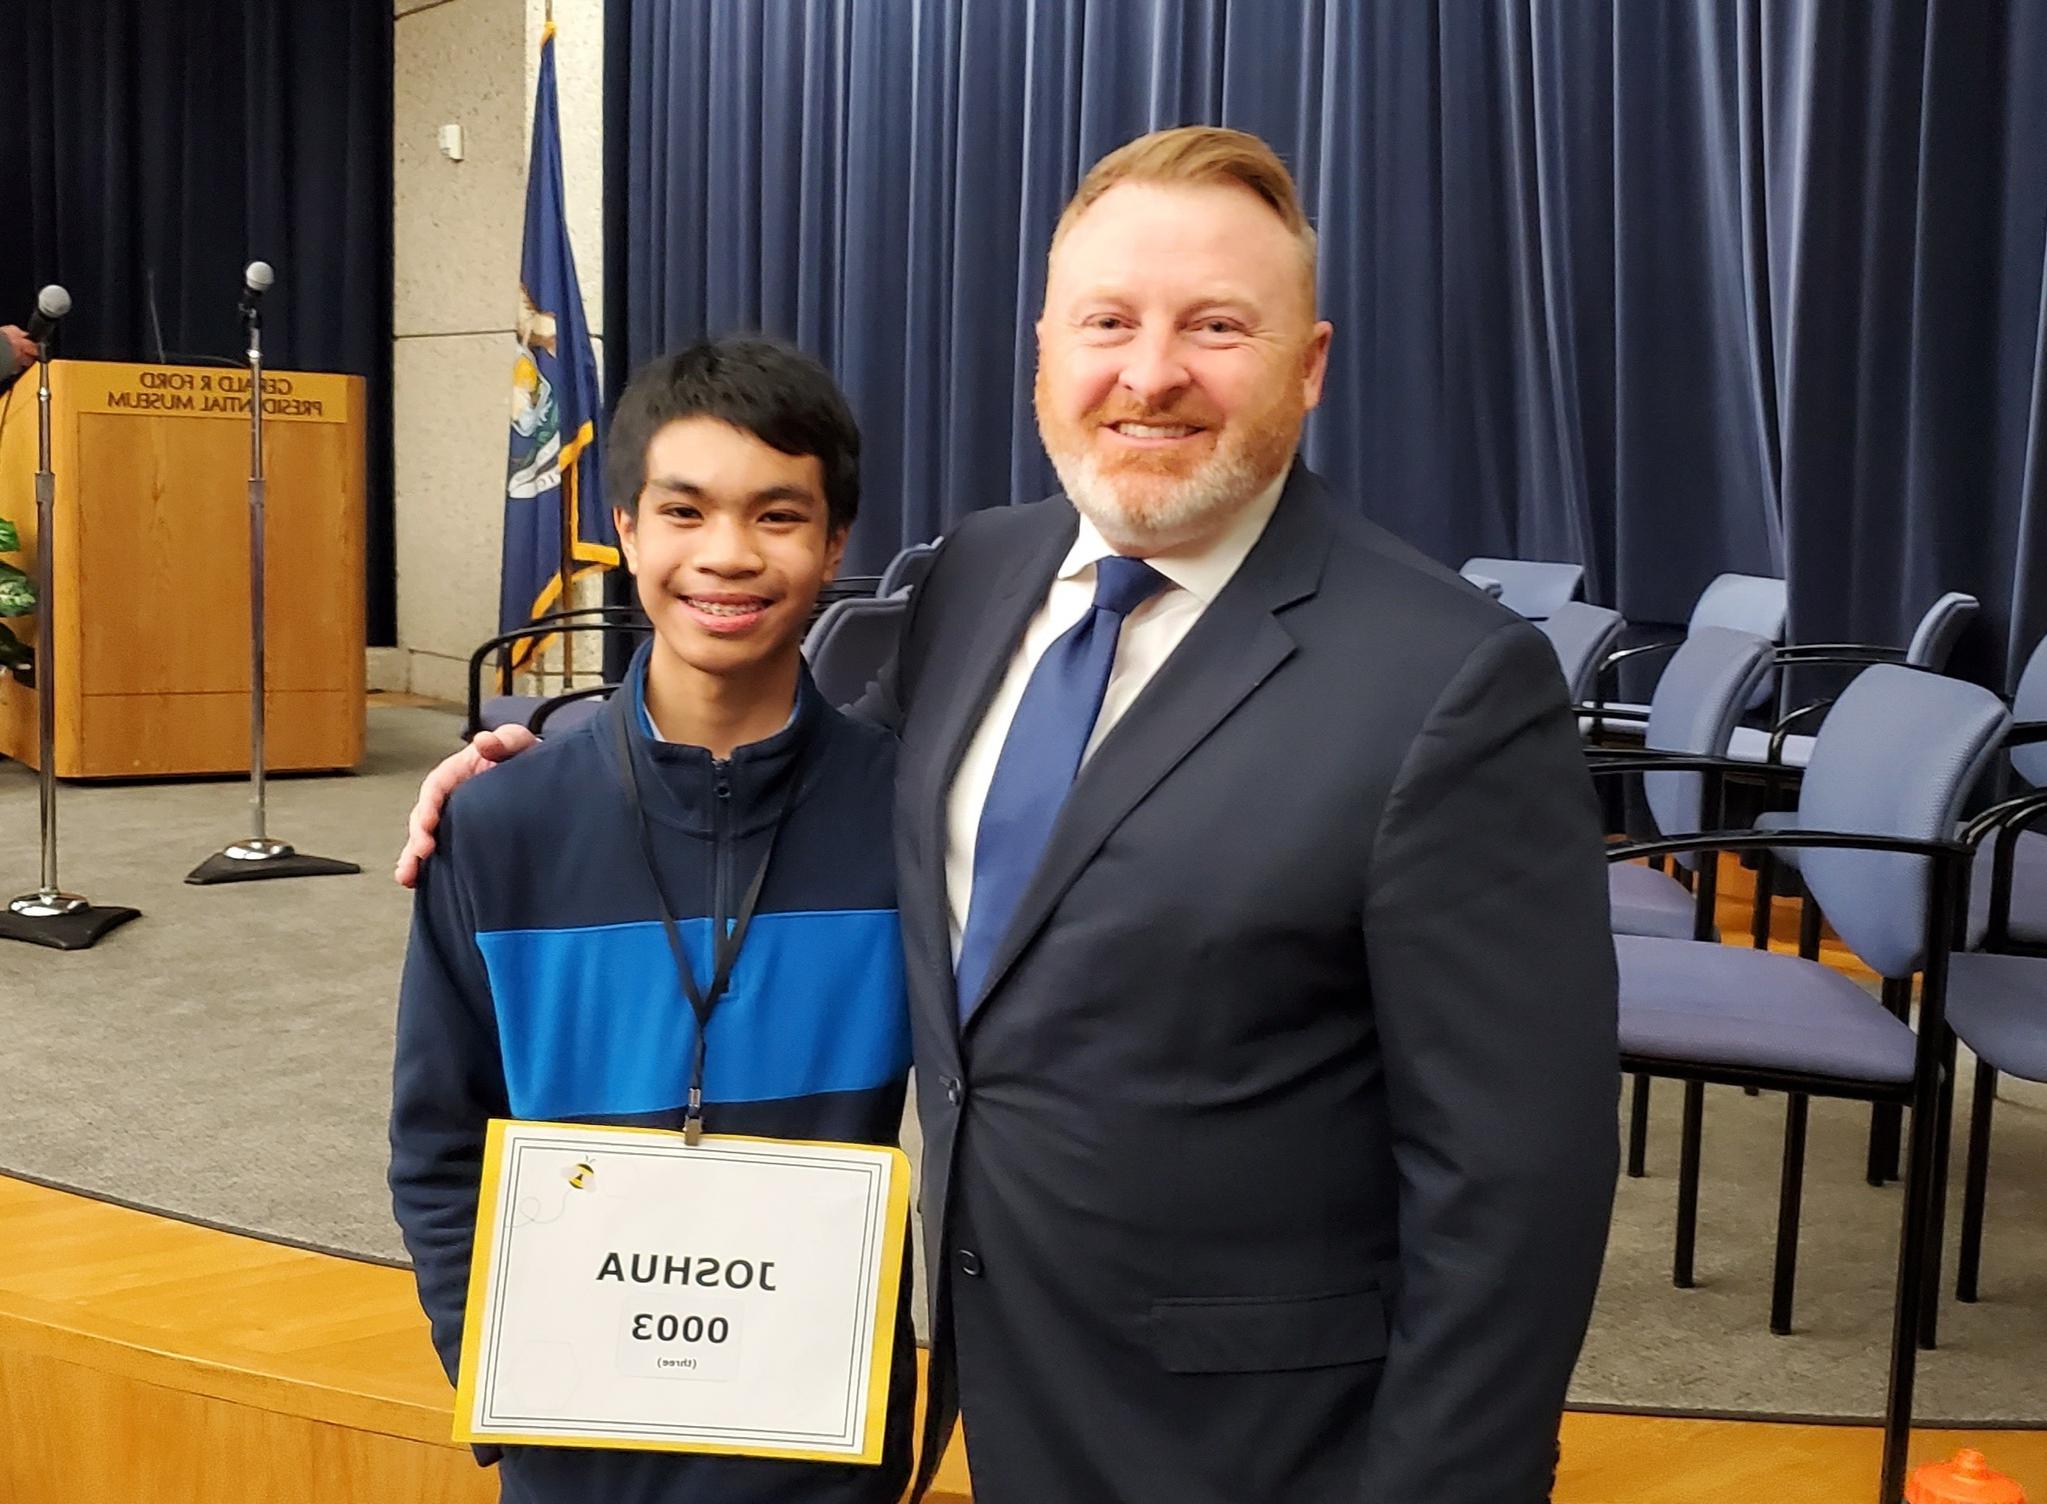 Kent ISD Superintendent Ron Gorman and Spelling Bee winner Joshua Diocares